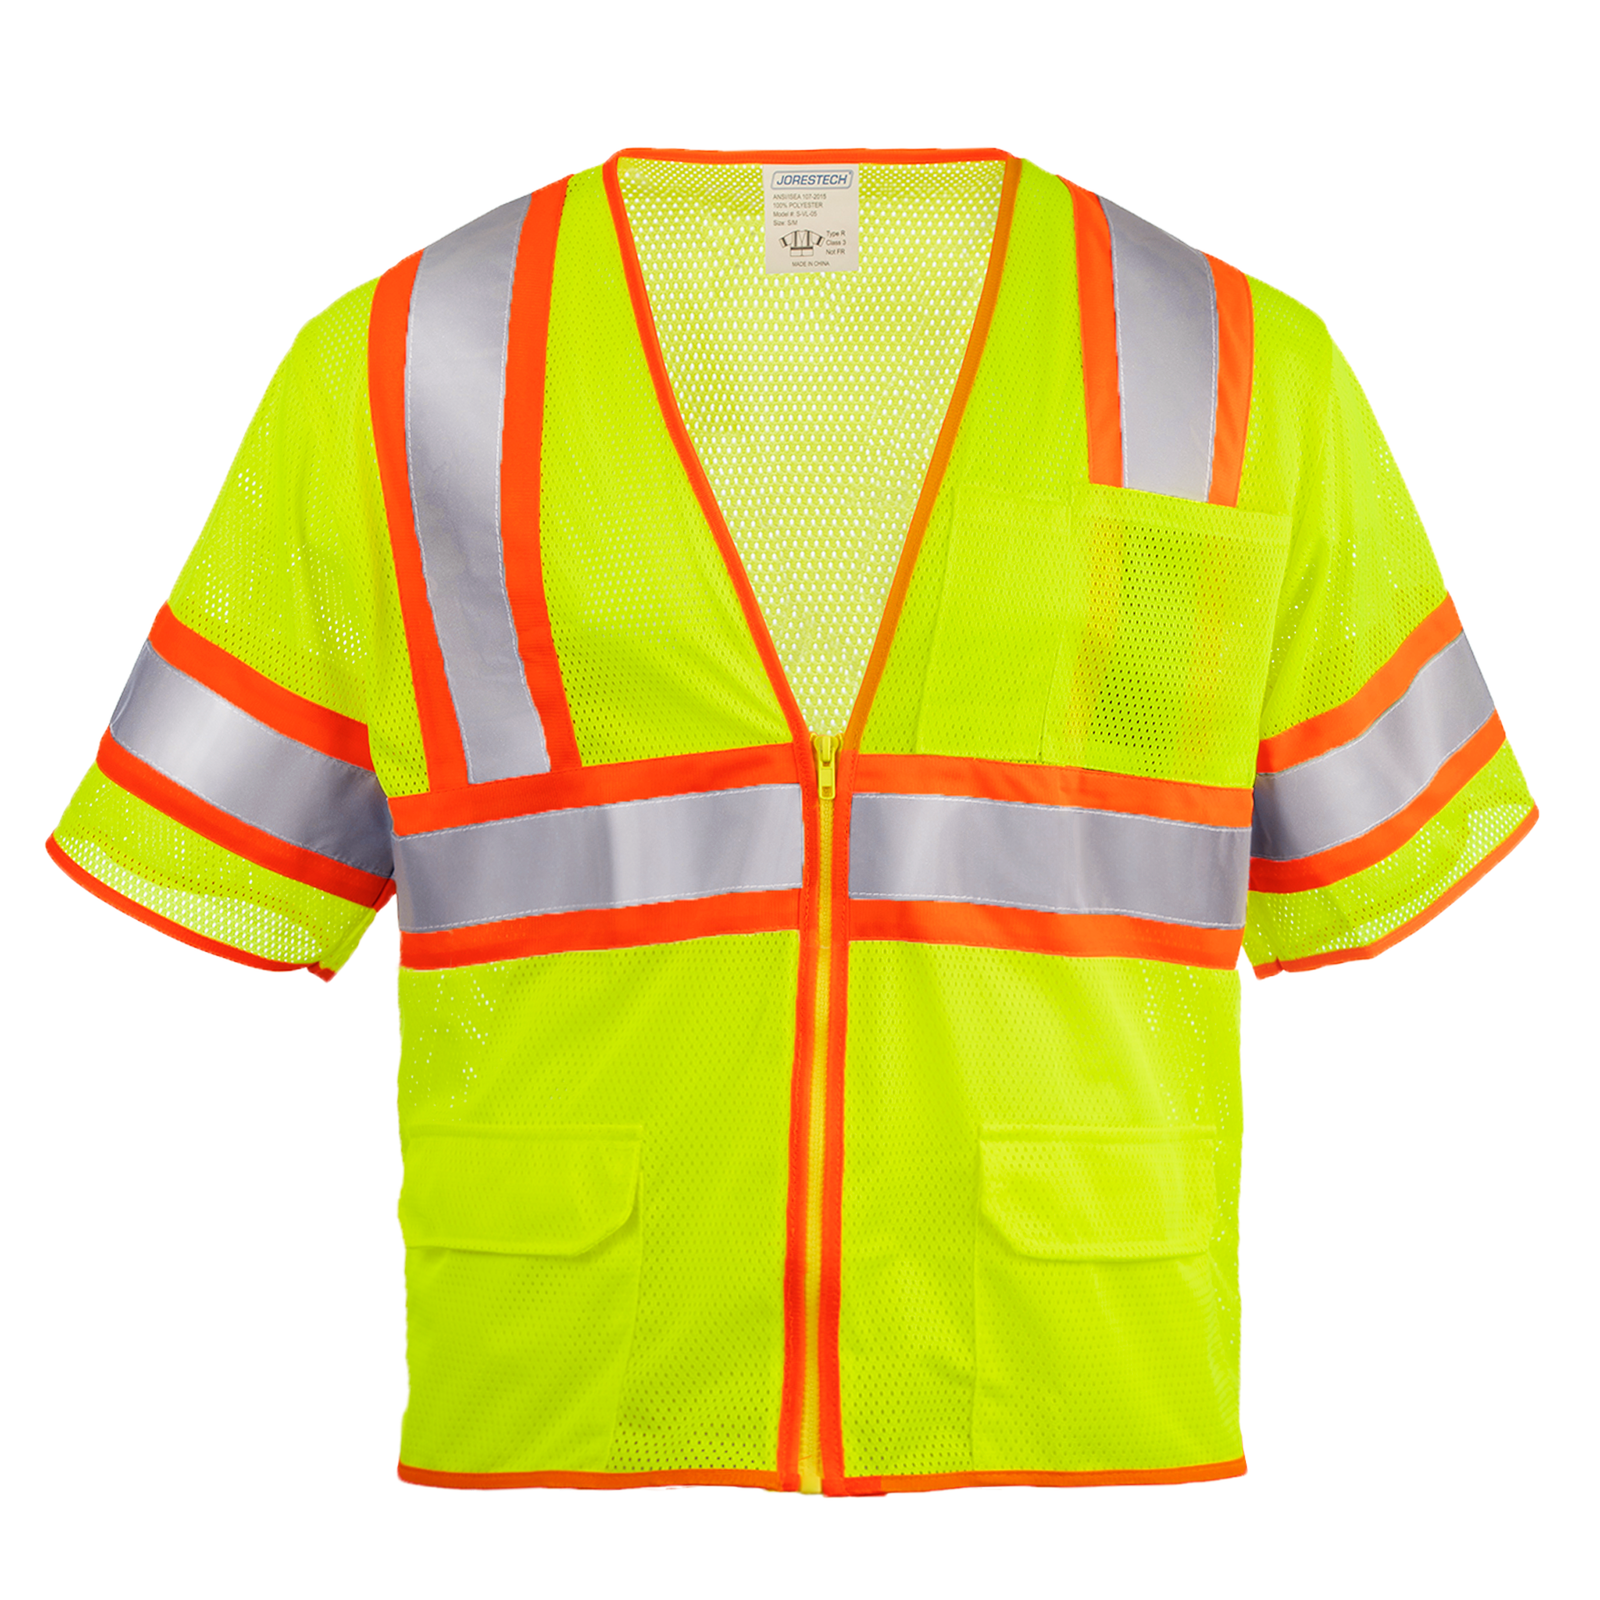 frontal view of the JORESTECH® Hi-Vis two toned mesh sleeved safety vest with 2 inches reflective strips over white background.